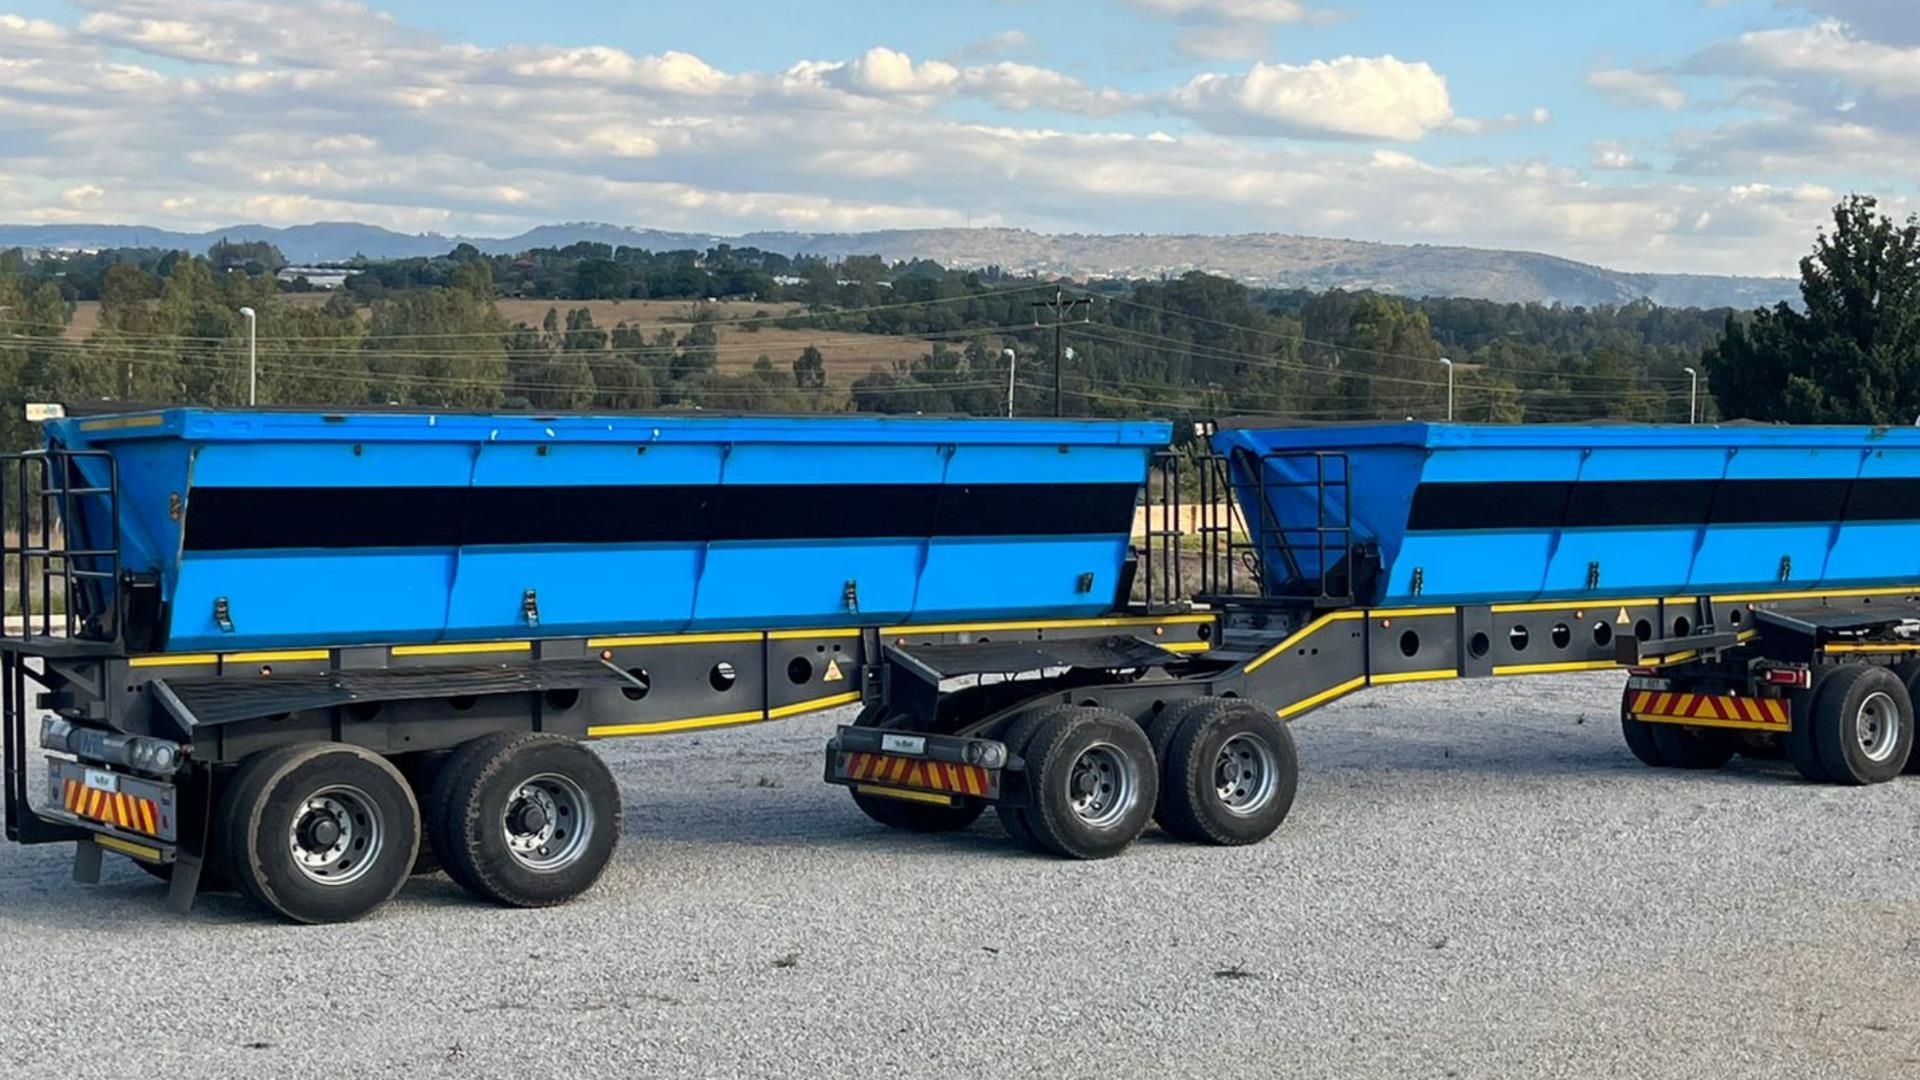 Afrit Trailers 2017 Afrit 40m3 Trailer 2017 for sale by Truck and Plant Connection | Truck & Trailer Marketplaces